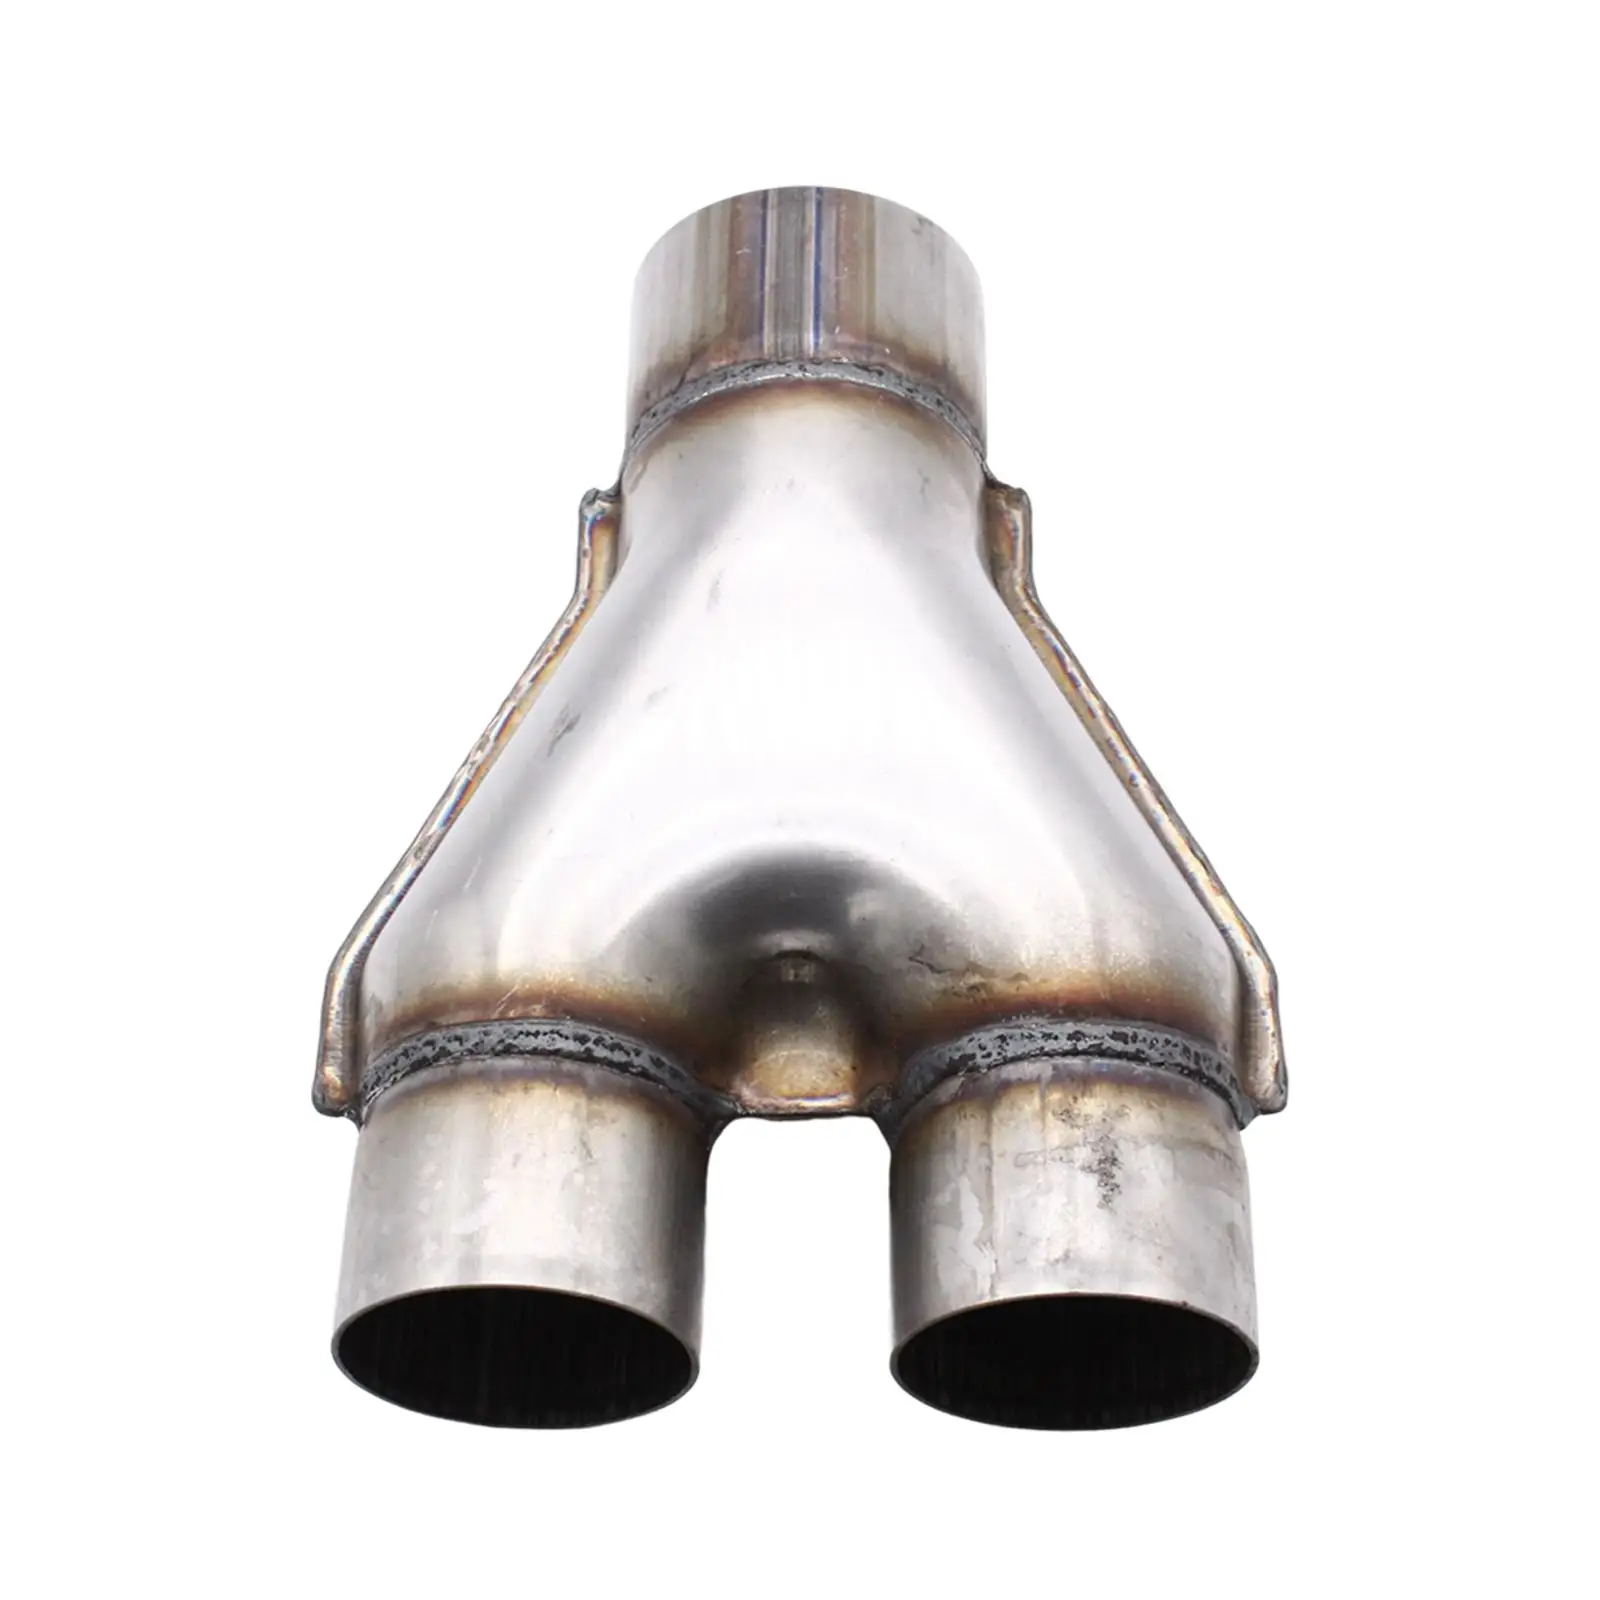 3inch Single to 2 1/2inch Dual Exhaust Adapter Y Pipe Stainless Steel Automotive Accessories Sturdy Length 10